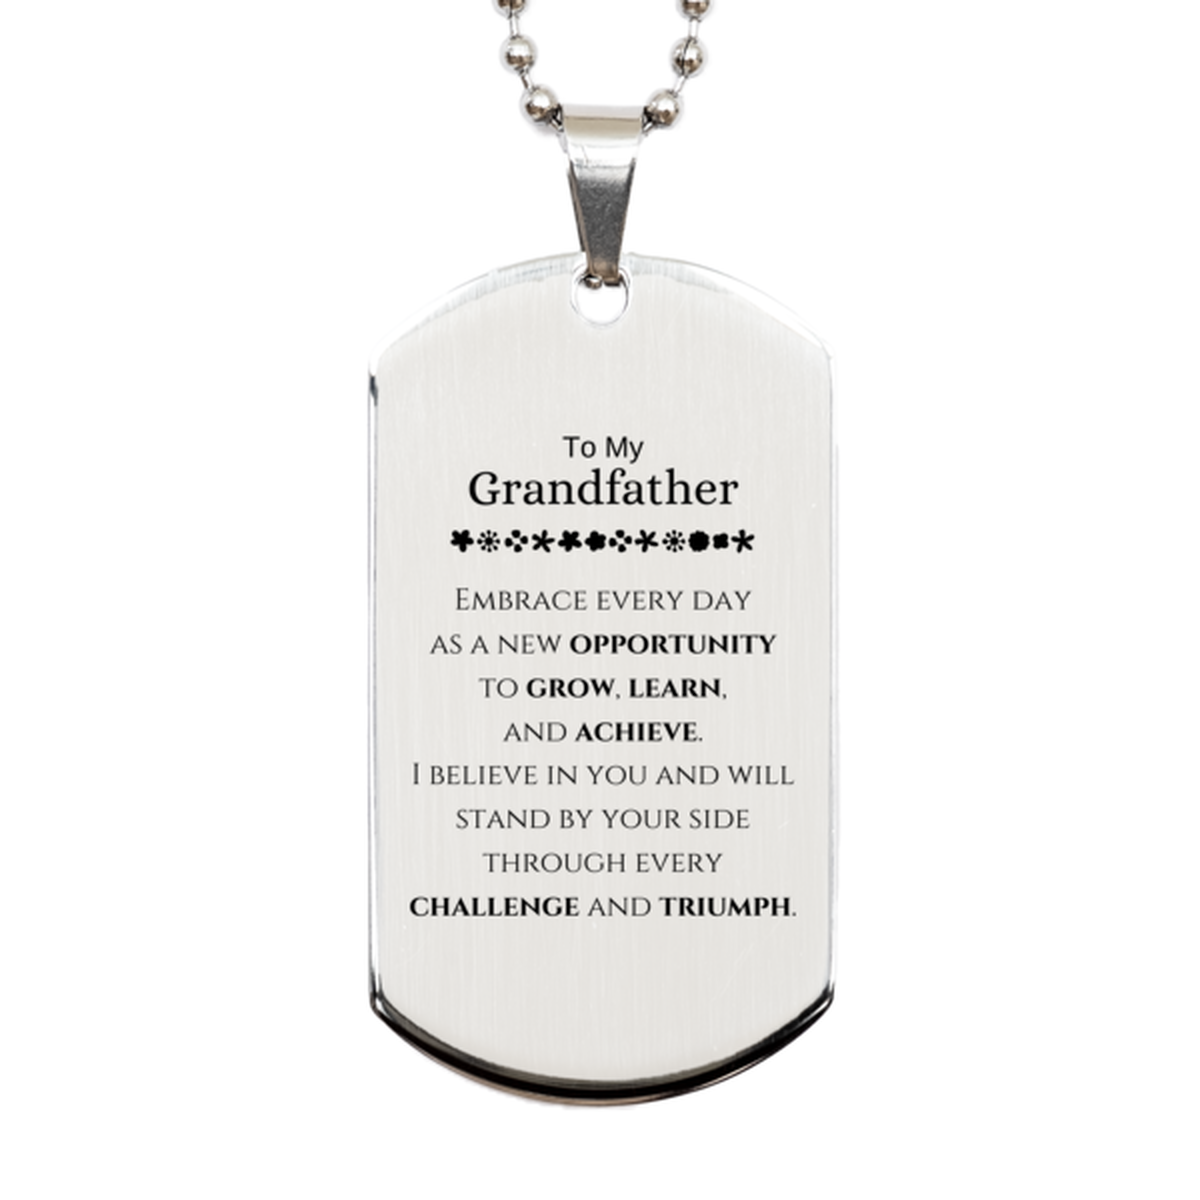 To My Grandfather Gifts, I believe in you and will stand by your side, Inspirational Silver Dog Tag For Grandfather, Birthday Christmas Motivational Grandfather Gifts